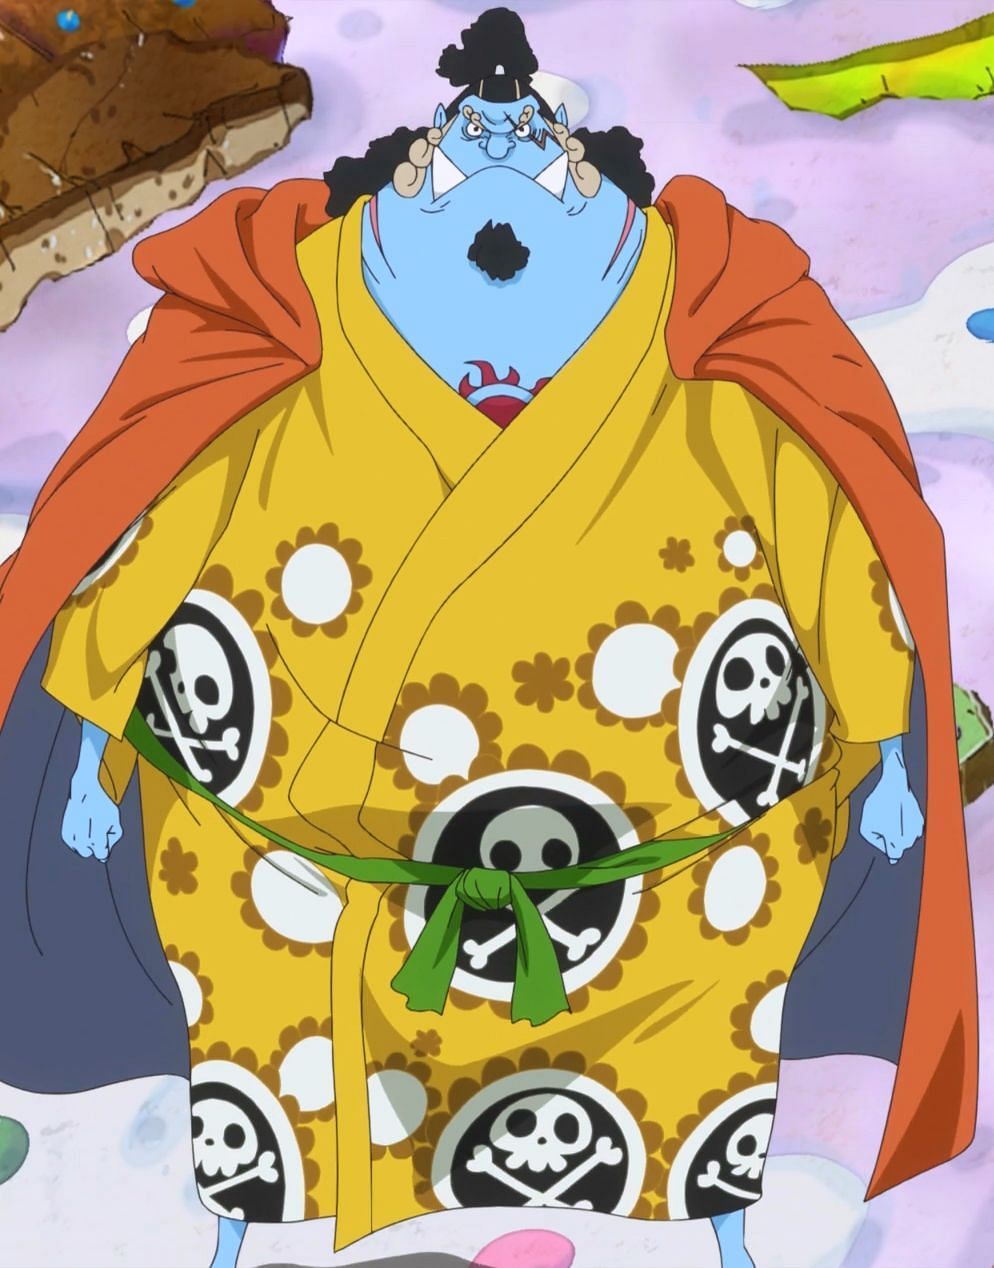 First Son of the Sea, Jinbe. (Image via Toei Animation)